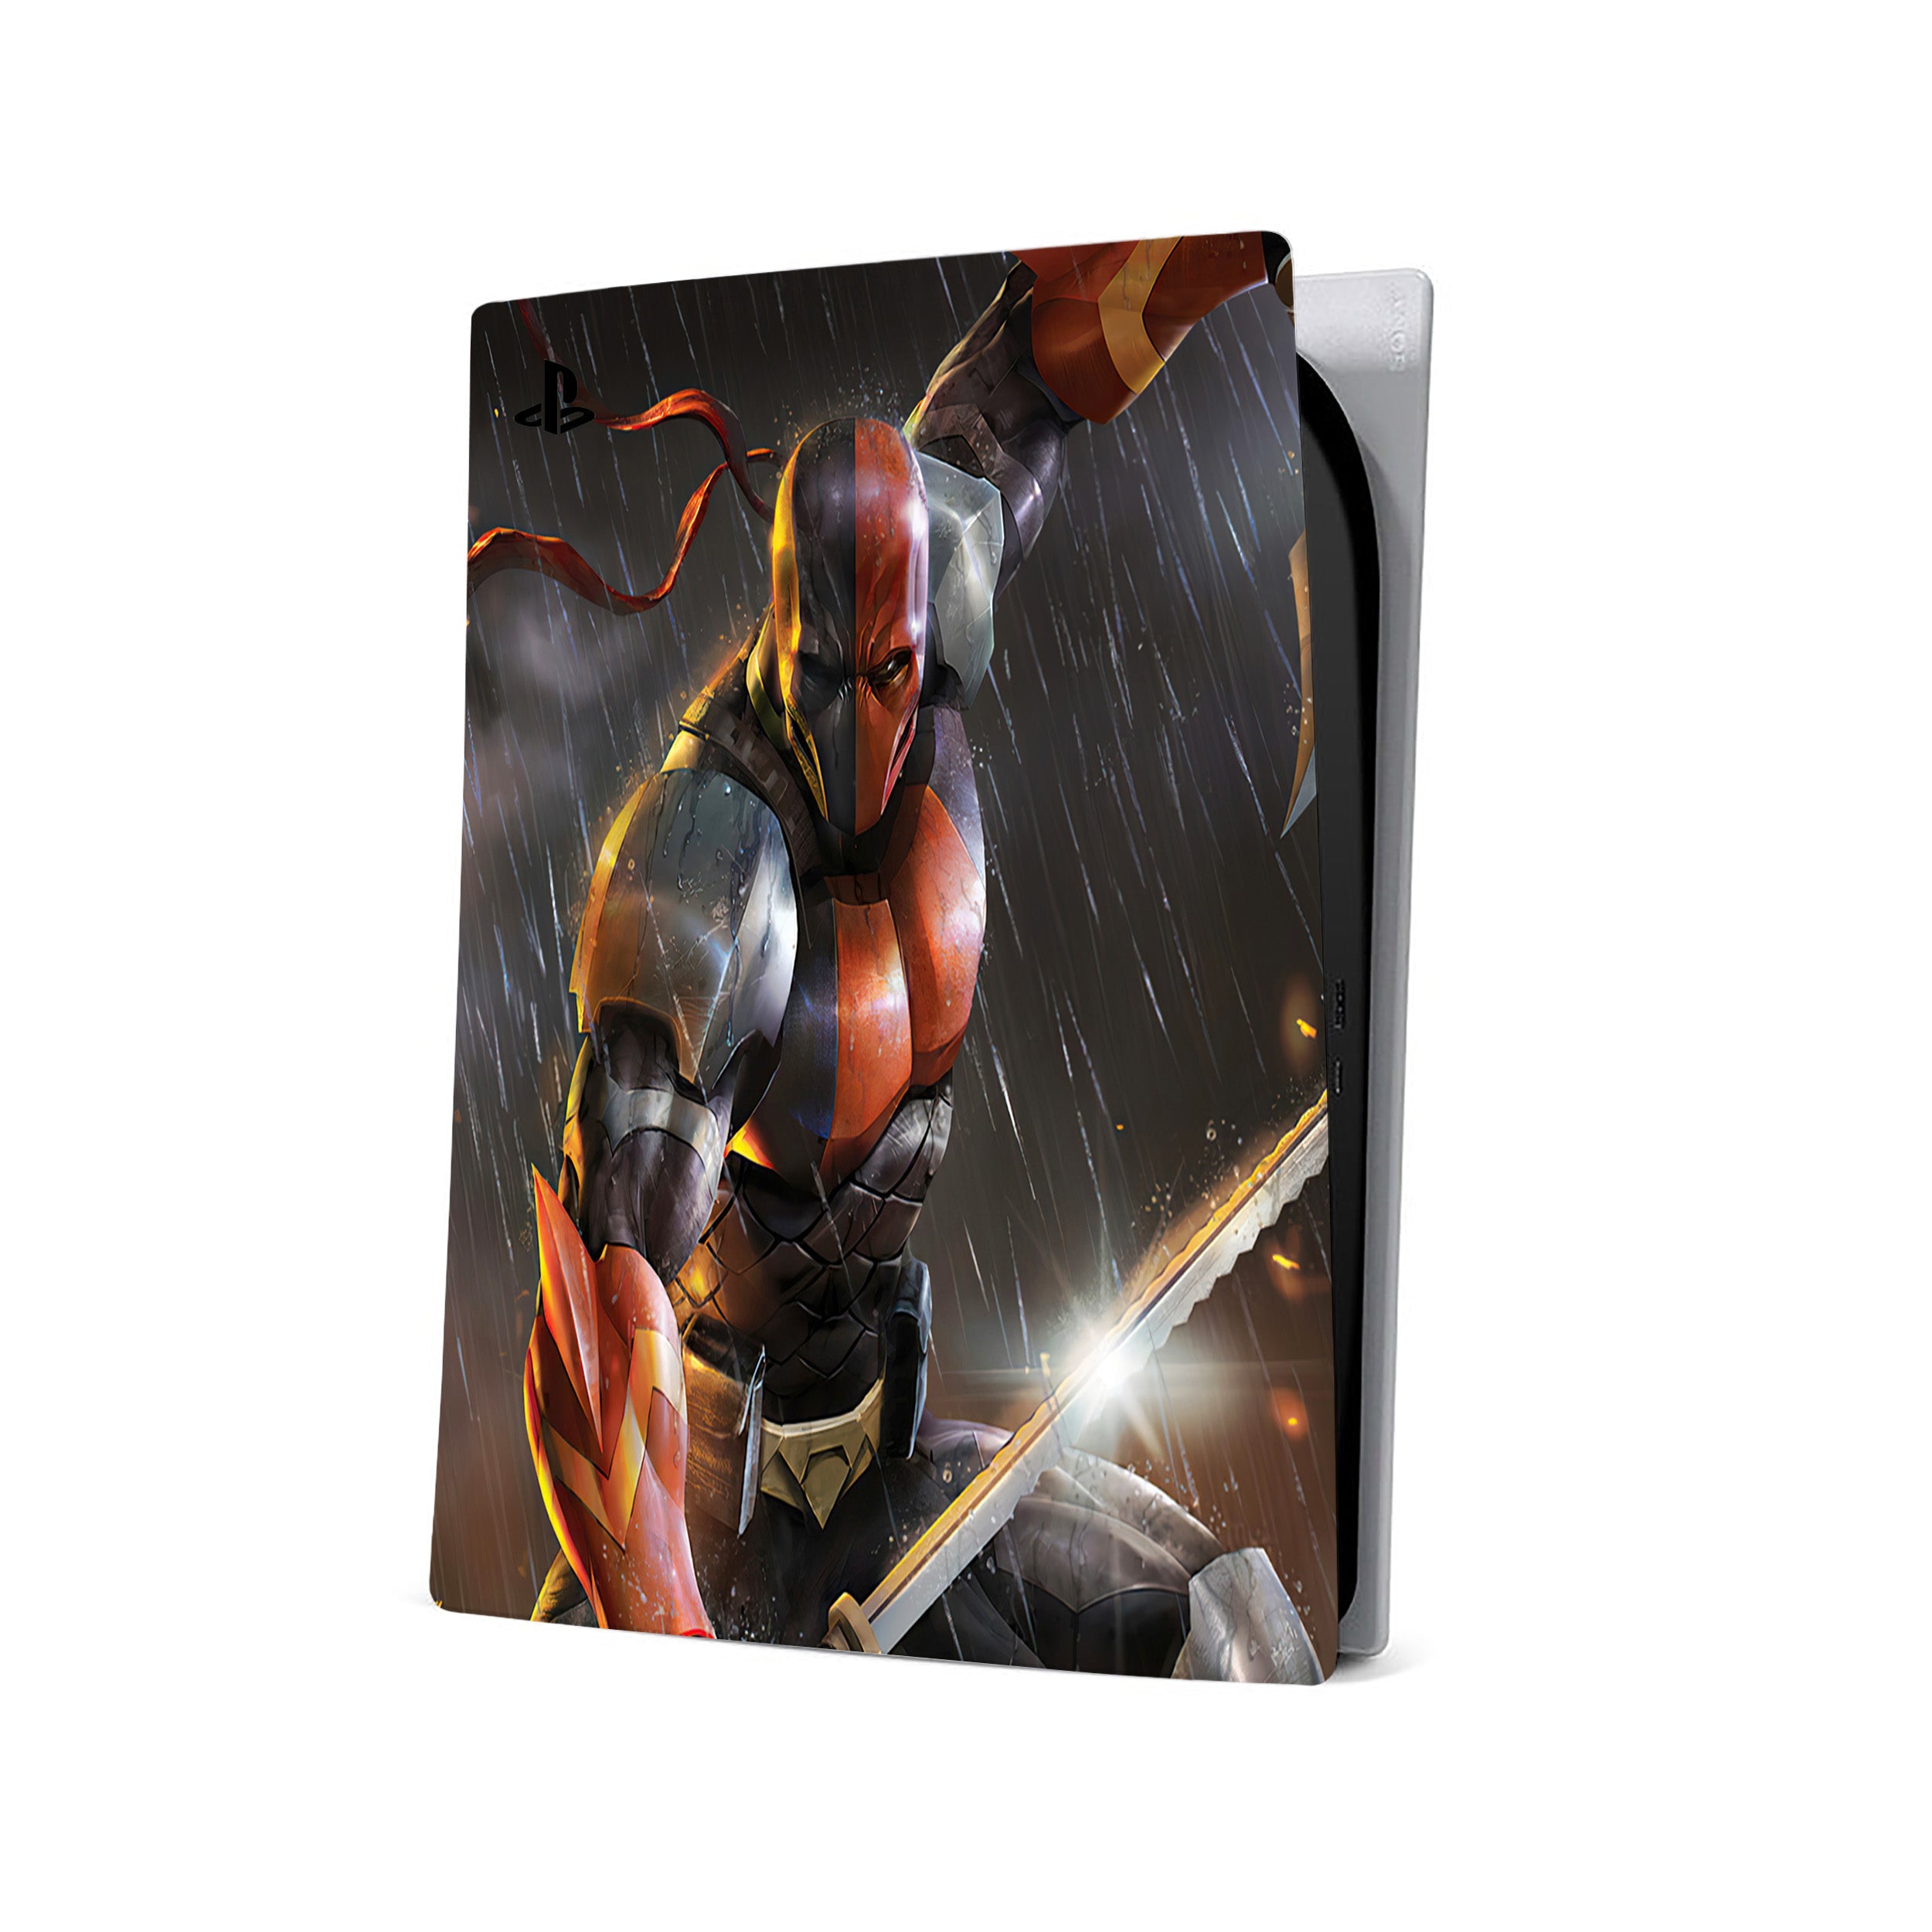 A video game skin featuring a DC Comics Deathstroke design for the PS5.